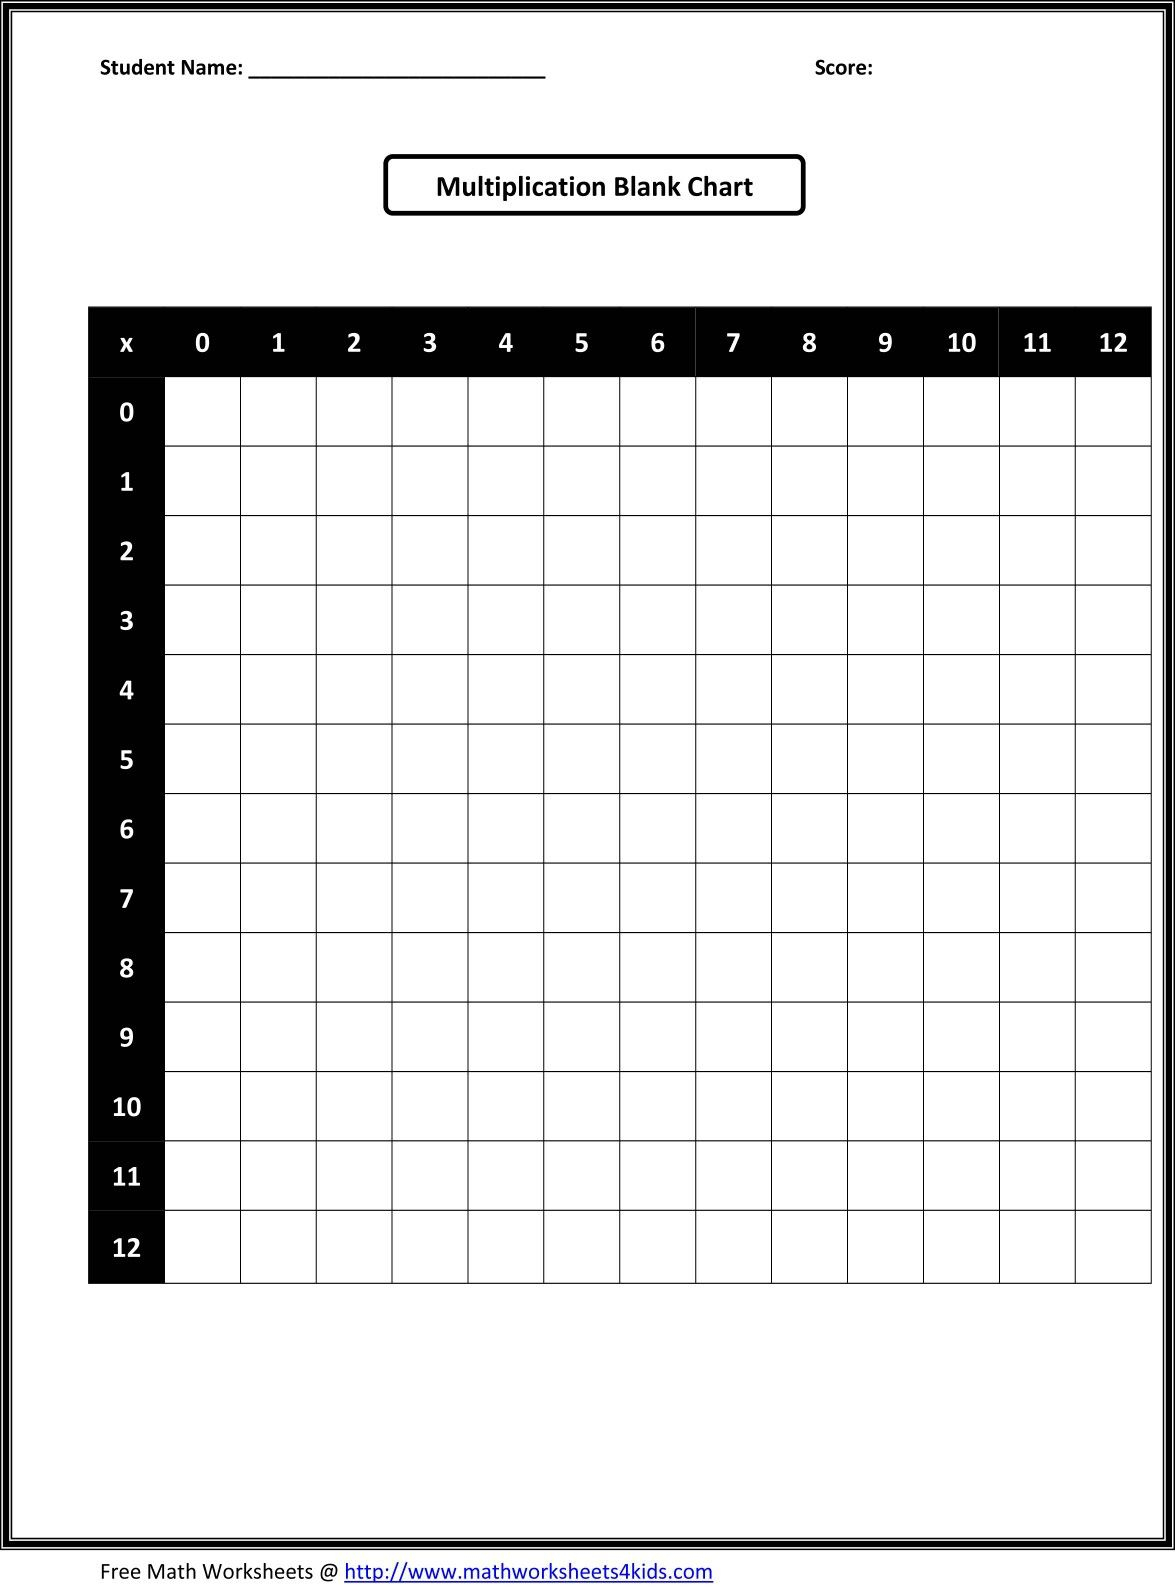 Blank Multiplication Chart. Grades 3-6. | Math Worksheets throughout Printable Empty Multiplication Table